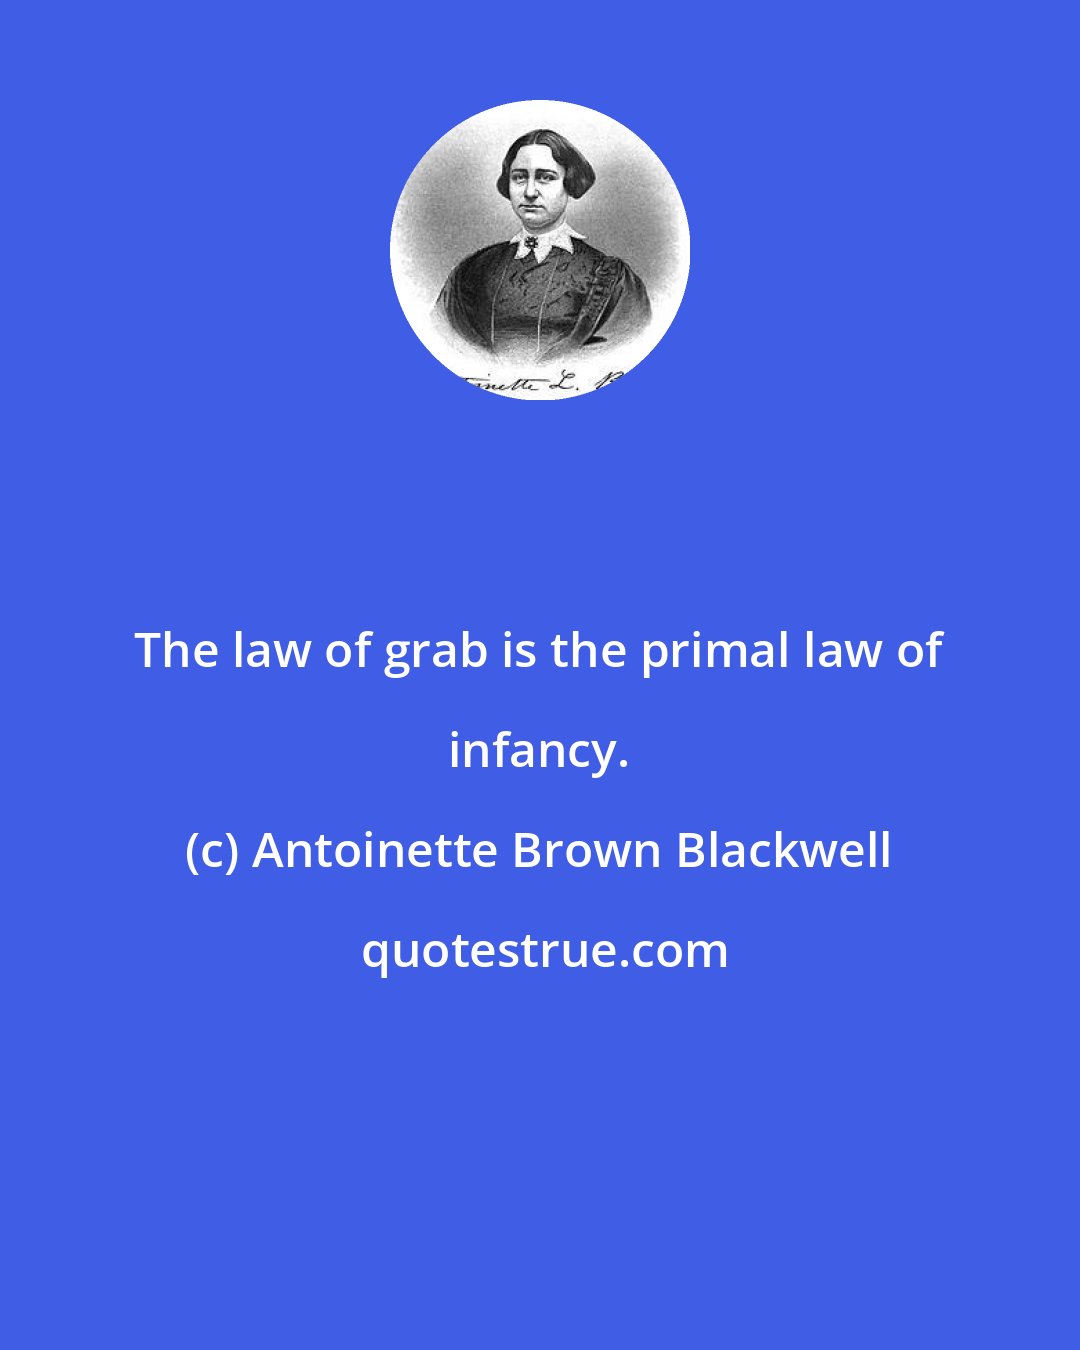 Antoinette Brown Blackwell: The law of grab is the primal law of infancy.